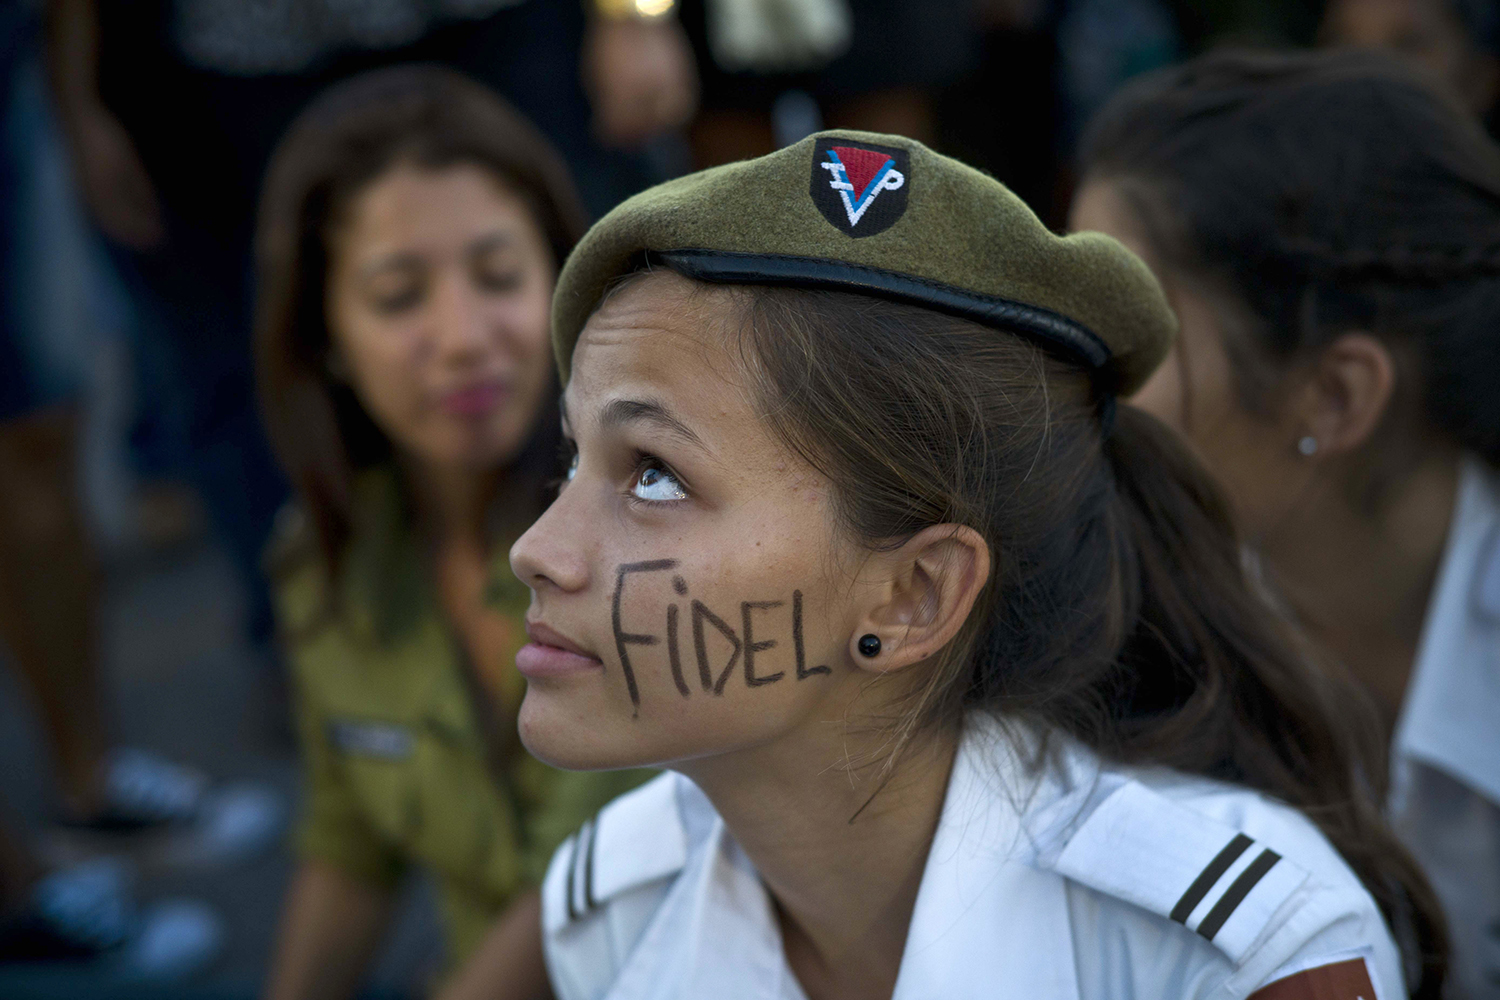 A cadet from the Interior Ministry with the word Fidel painted on her face attends a rally honoring the late Cuban leader at the Revolution Plaza in Havana, Cuba, Tuesday, Nov. 29, 2016. Schools and government offices were closed Tuesday for a second day of homage to Fidel Castro, with the day ending in a rally on the wide plaza where the Cuban leader delivered fiery speeches to mammoth crowds in the years after he seized power.Fidel Castro passed away Friday Nov. 25. He was 90. (AP Photo/Ramon Espinosa)